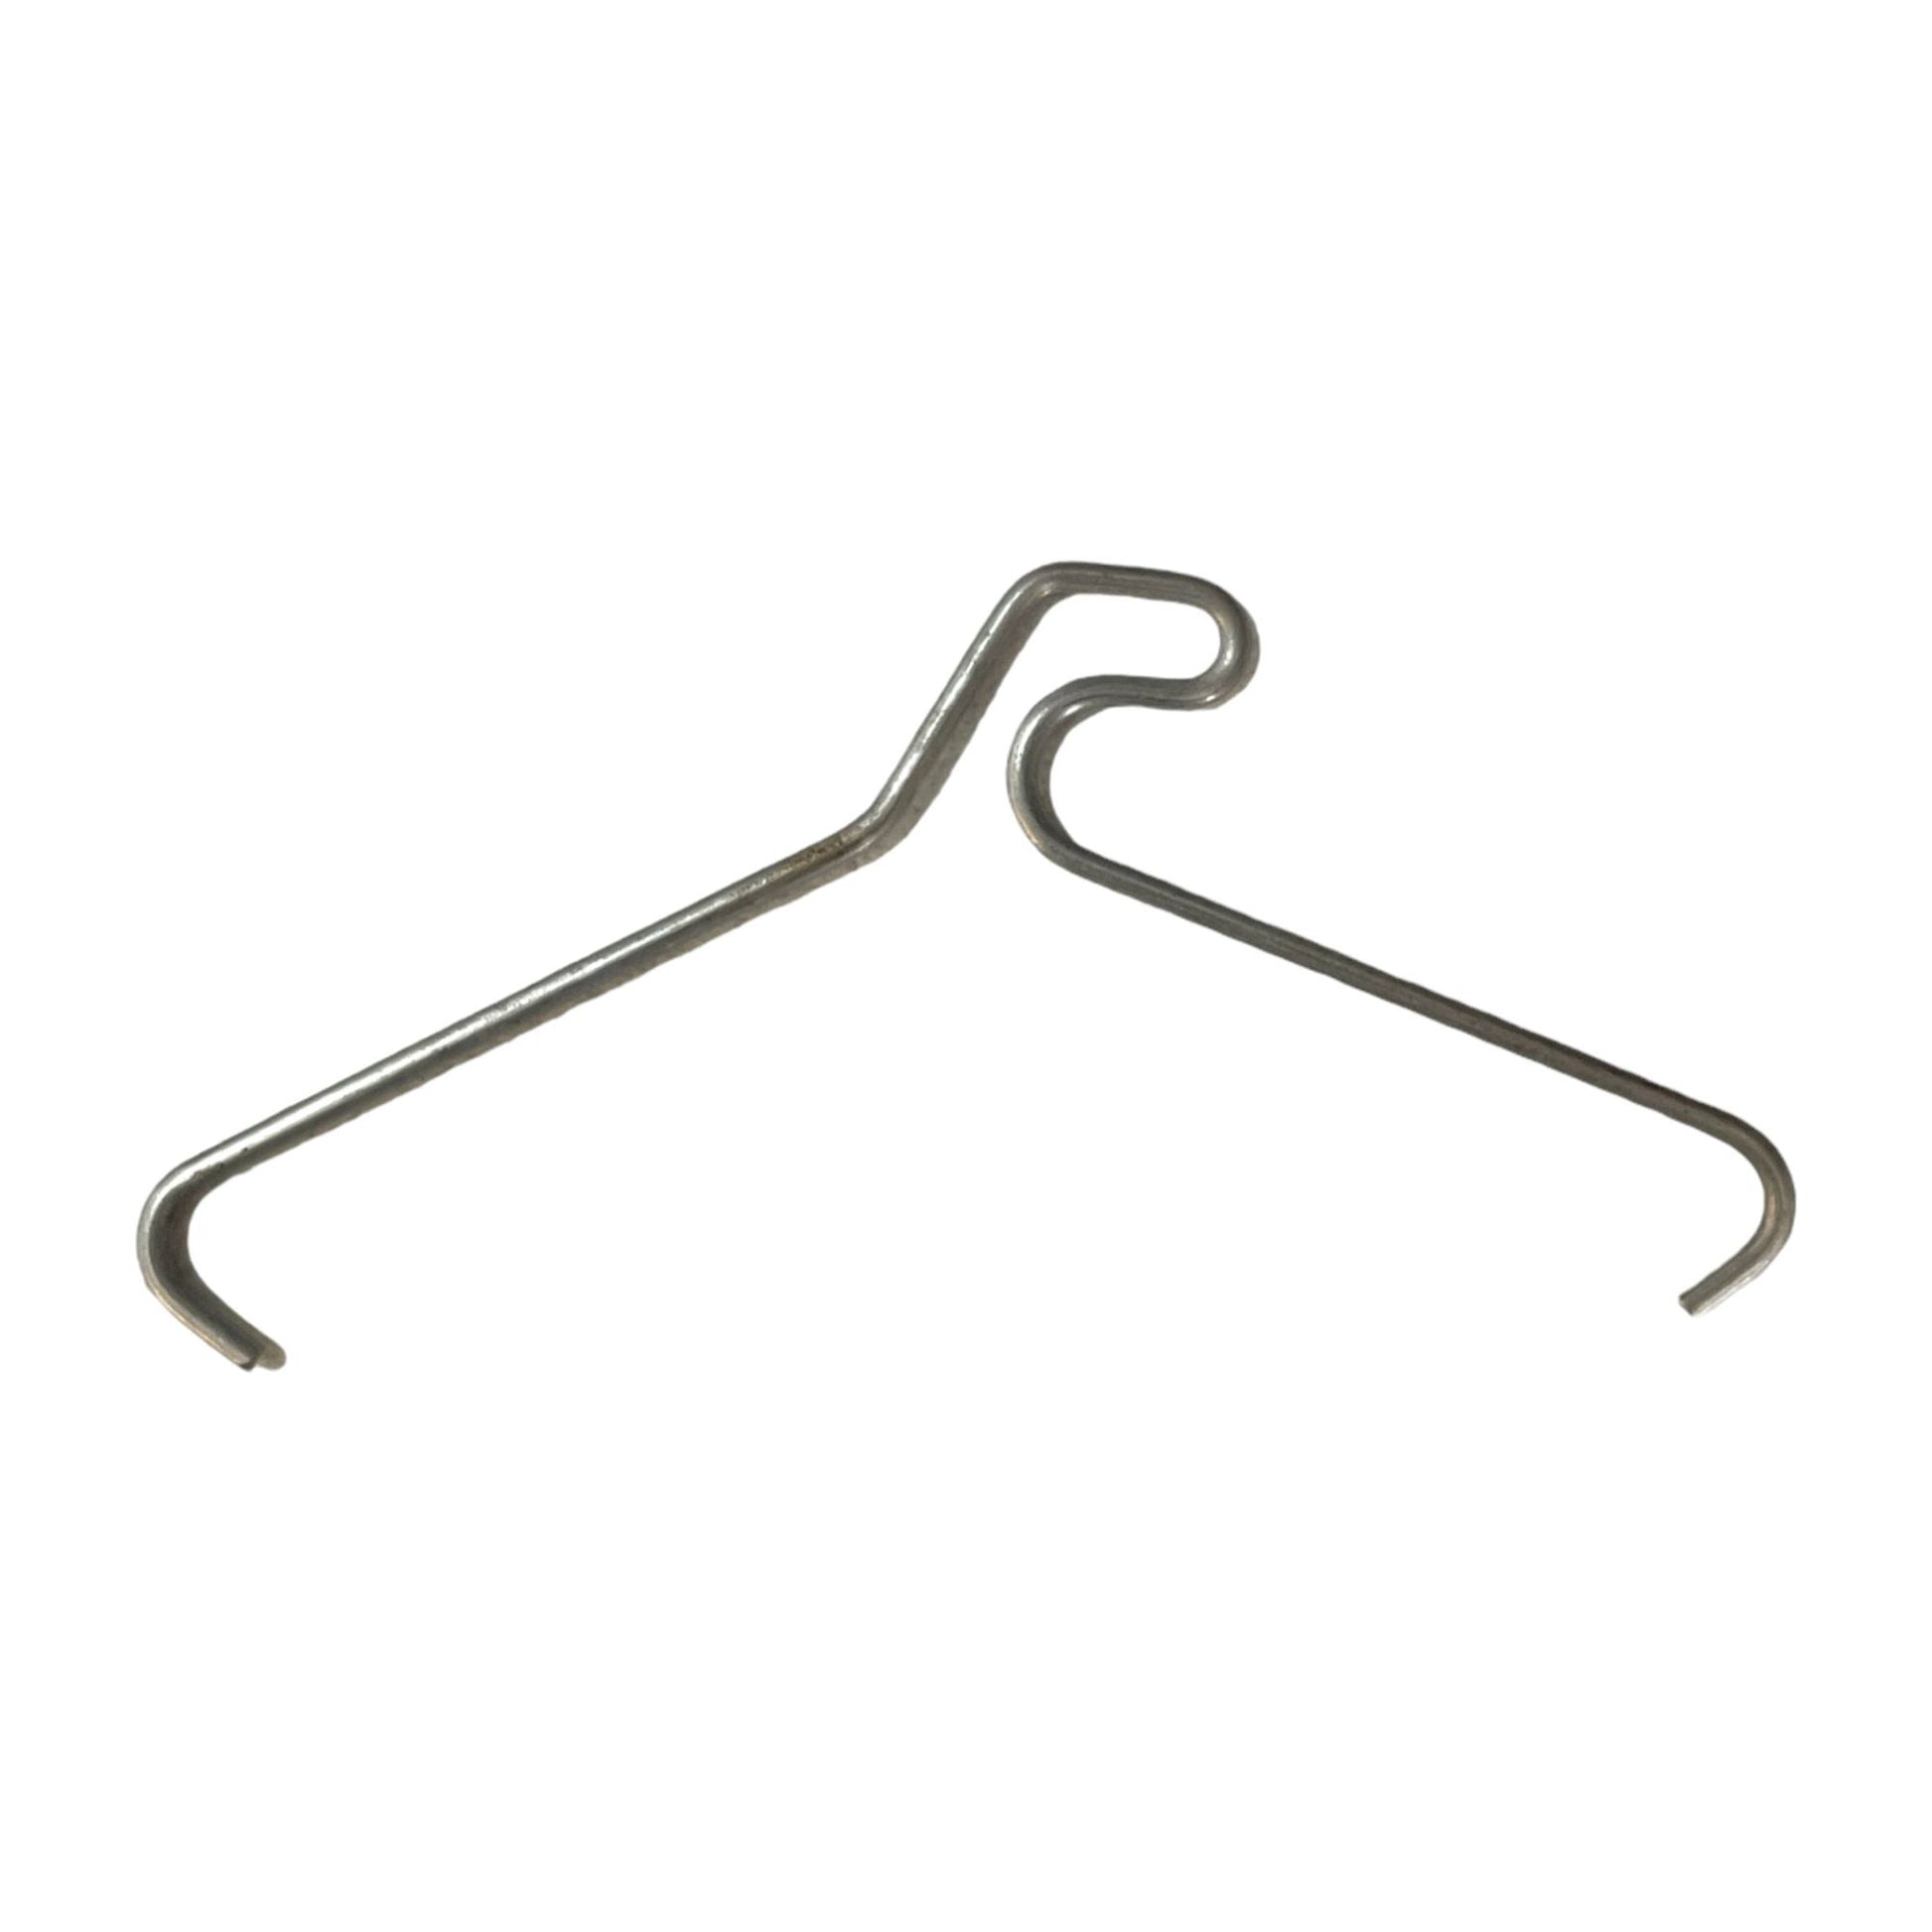 5 Pack 90mm (3.5") Brick Hooks - Wall Crab Clips Hangers For Pictures Plants